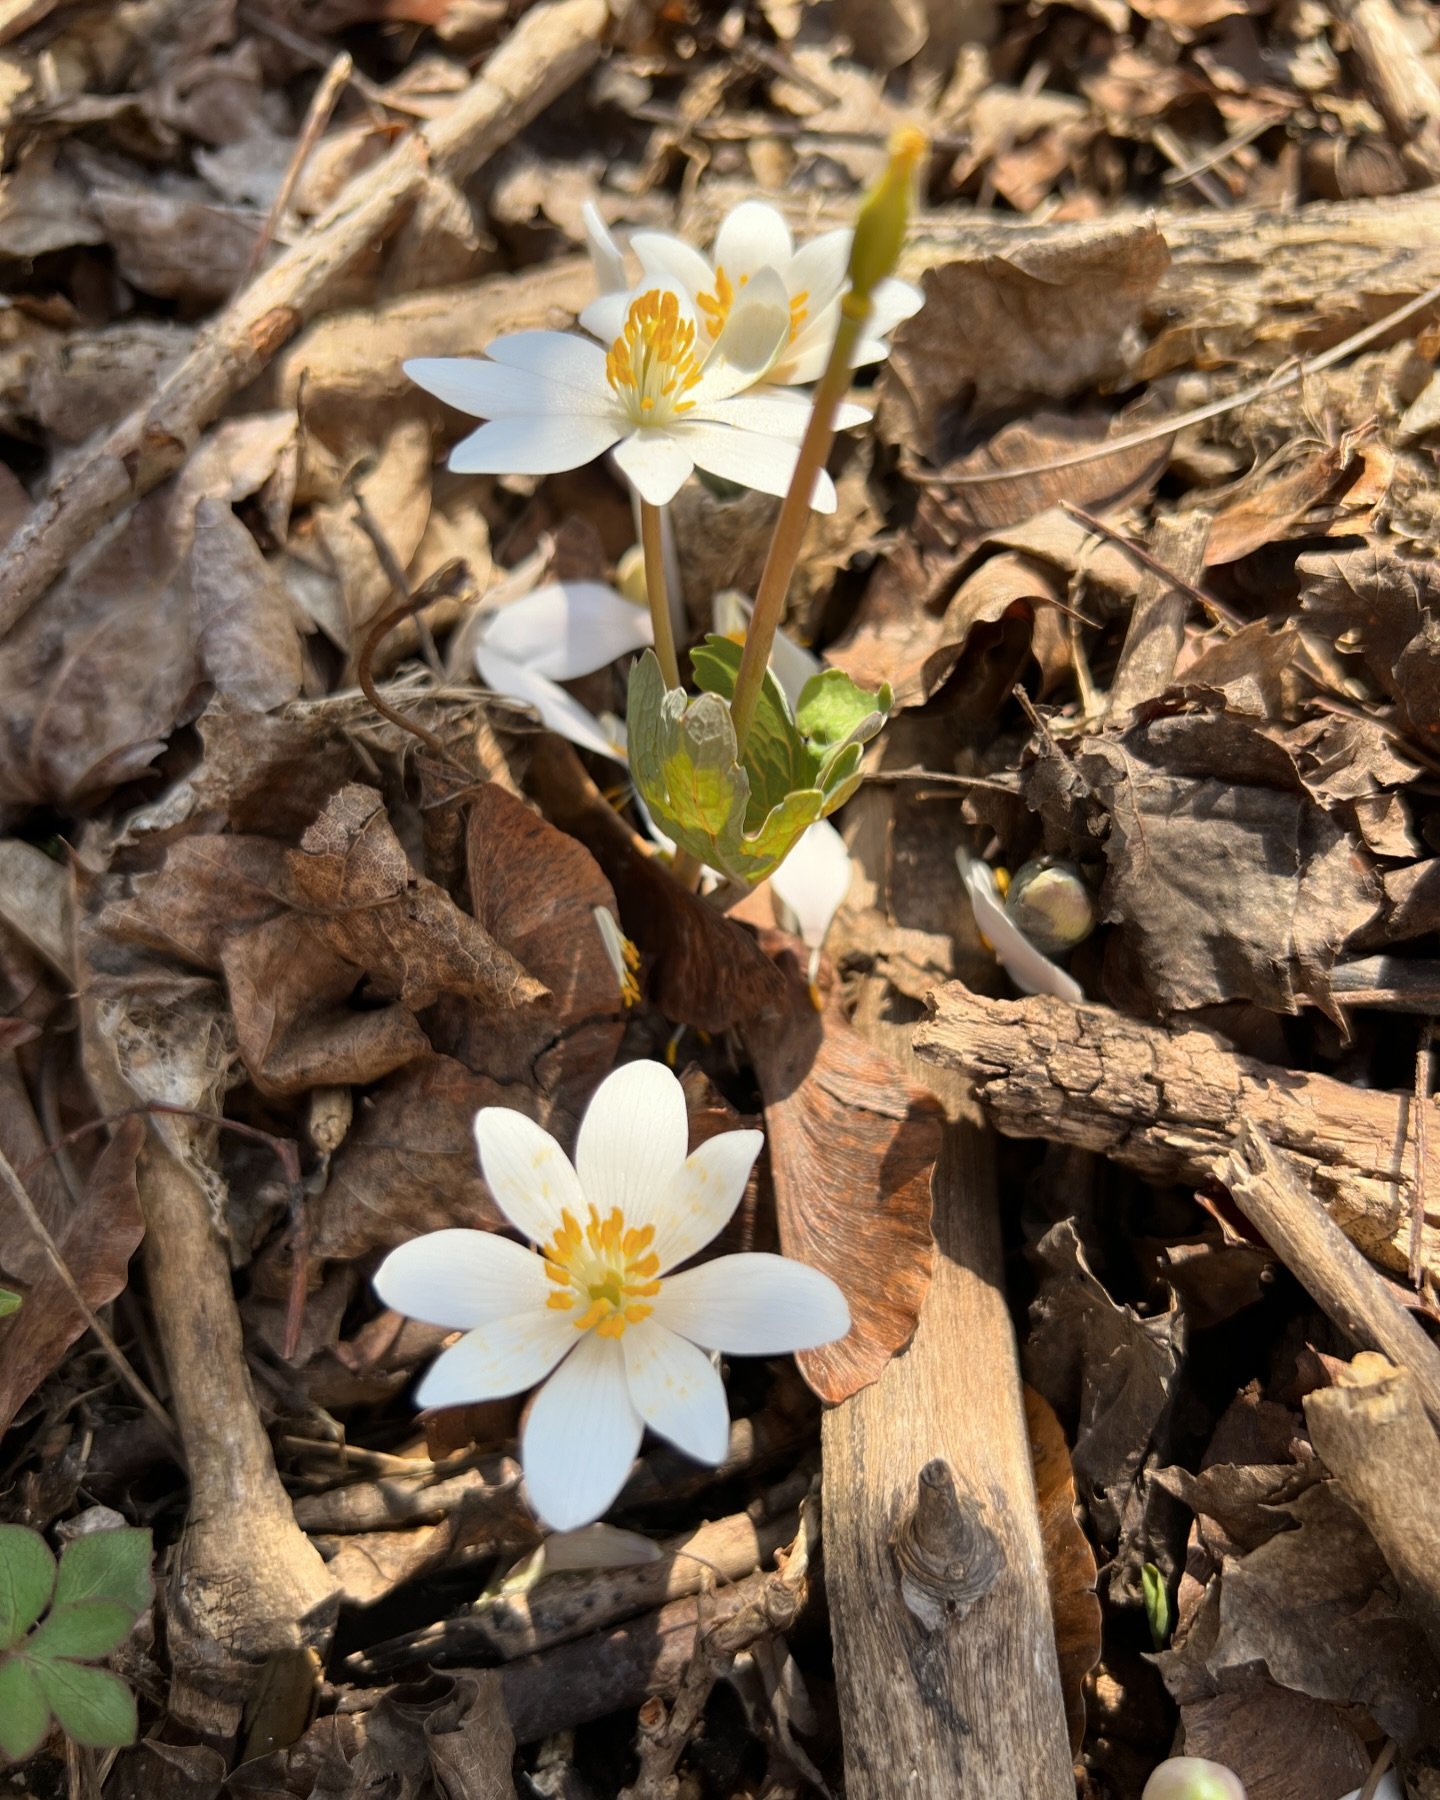 More bloodroot (Sanguinaria canadensis) for you!

It was a gorgeous weekend here in Michigan! I love getting lost in wandering around my yard looking at what&rsquo;s popping up or blooming. 

We&rsquo;ve received some photos and know that some of you